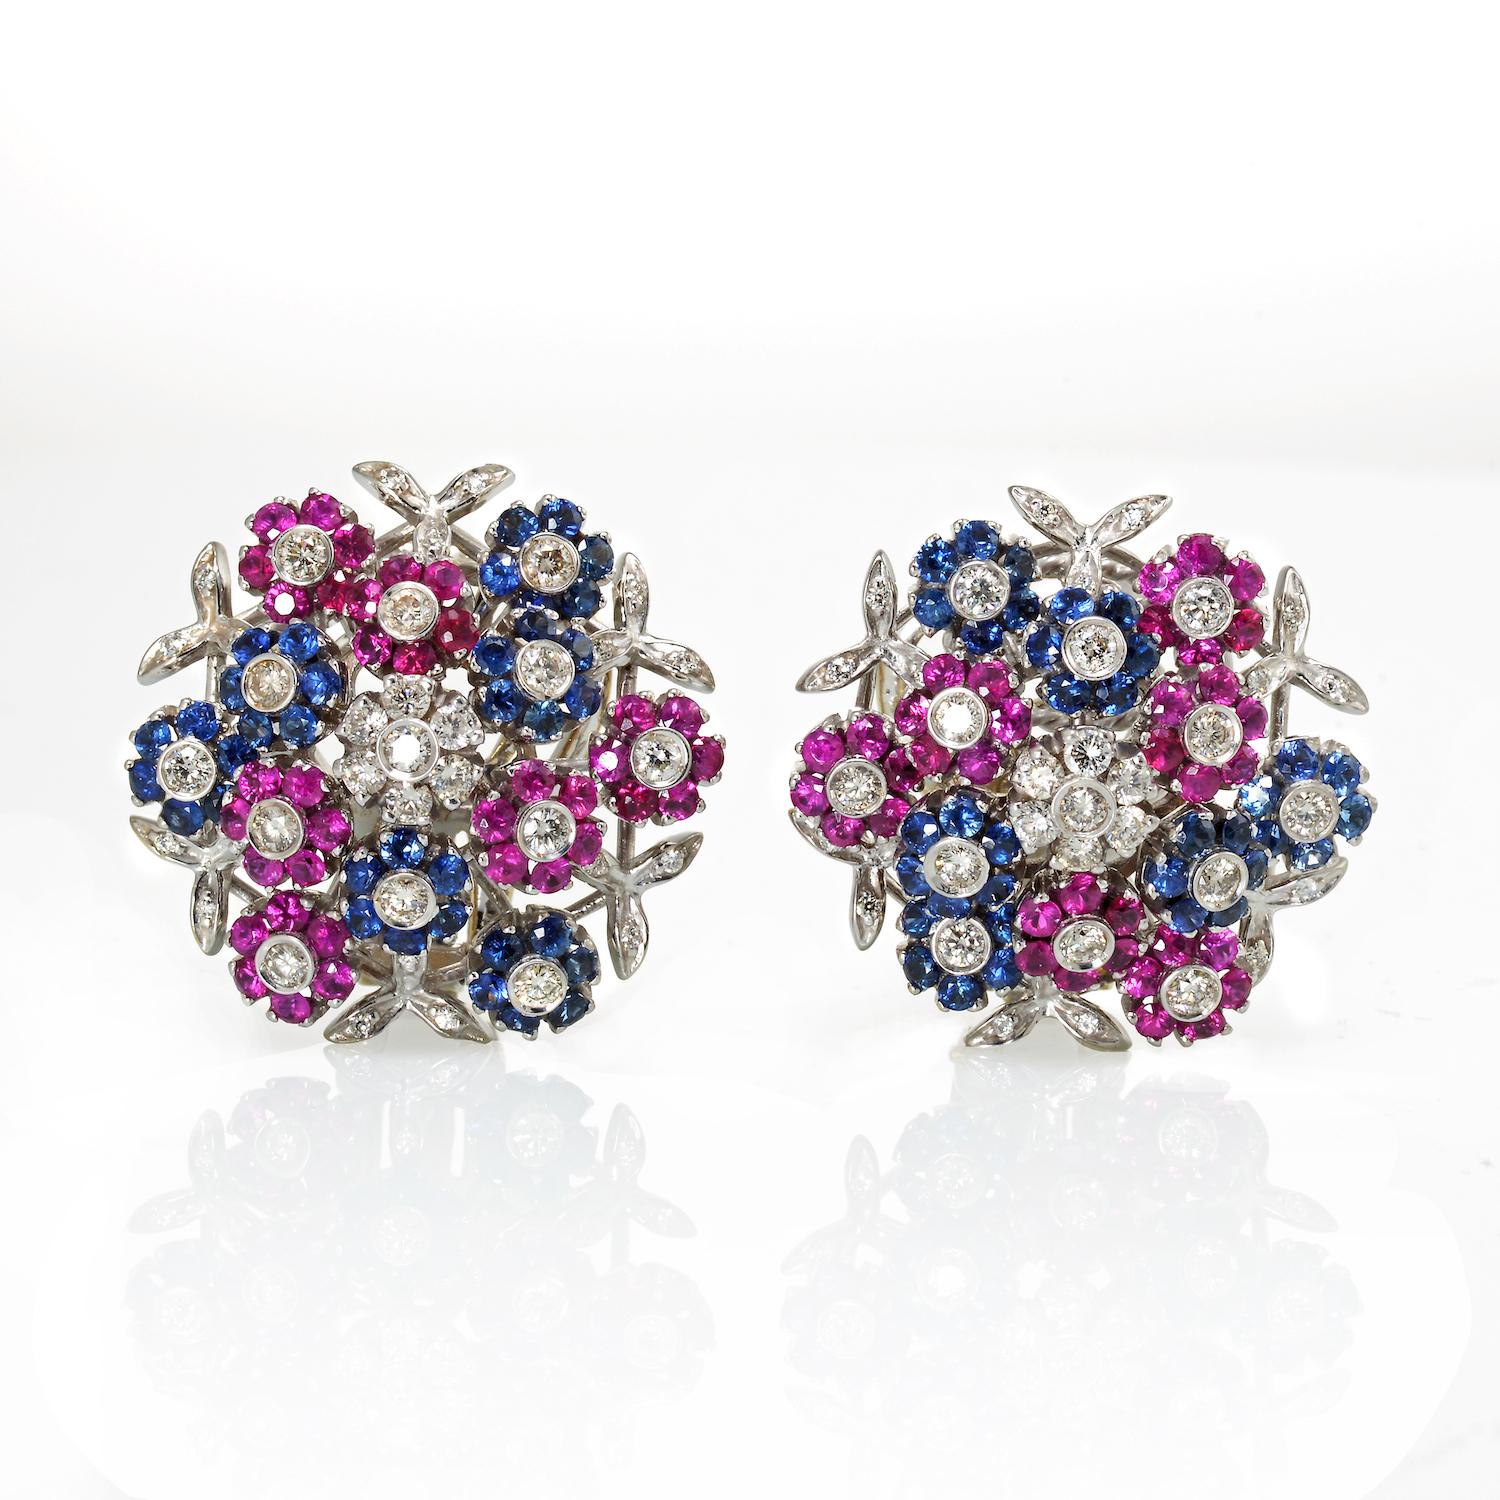 Modern Cartier Tremblant 18K White Gold Diamond, Sapphire and Ruby Clip-On Earrings For Sale